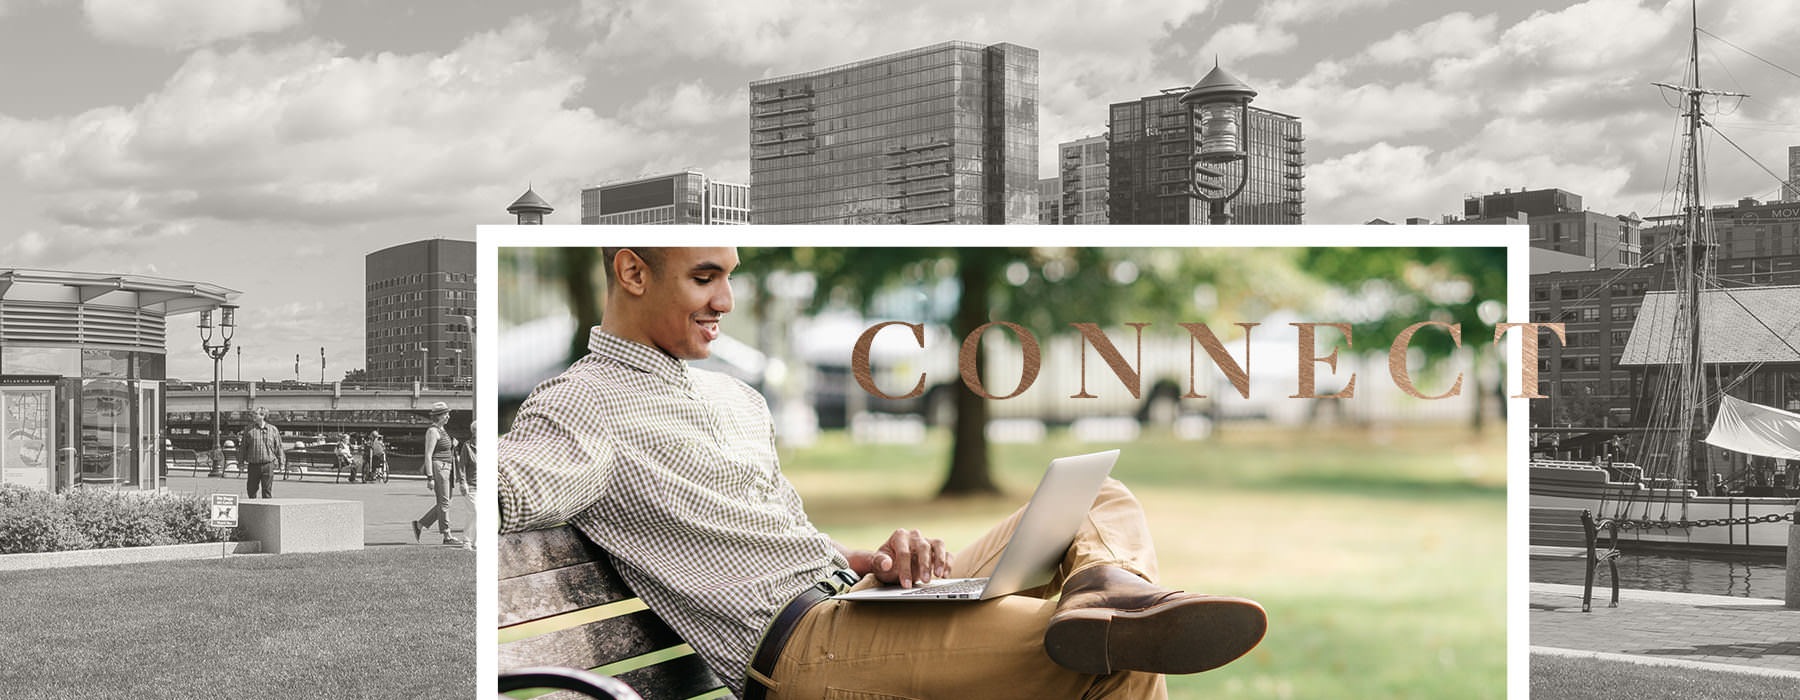 collage of man sitting on park bench looking at his laptop with secondary image of Atlantic Wharf Waterfront in the background